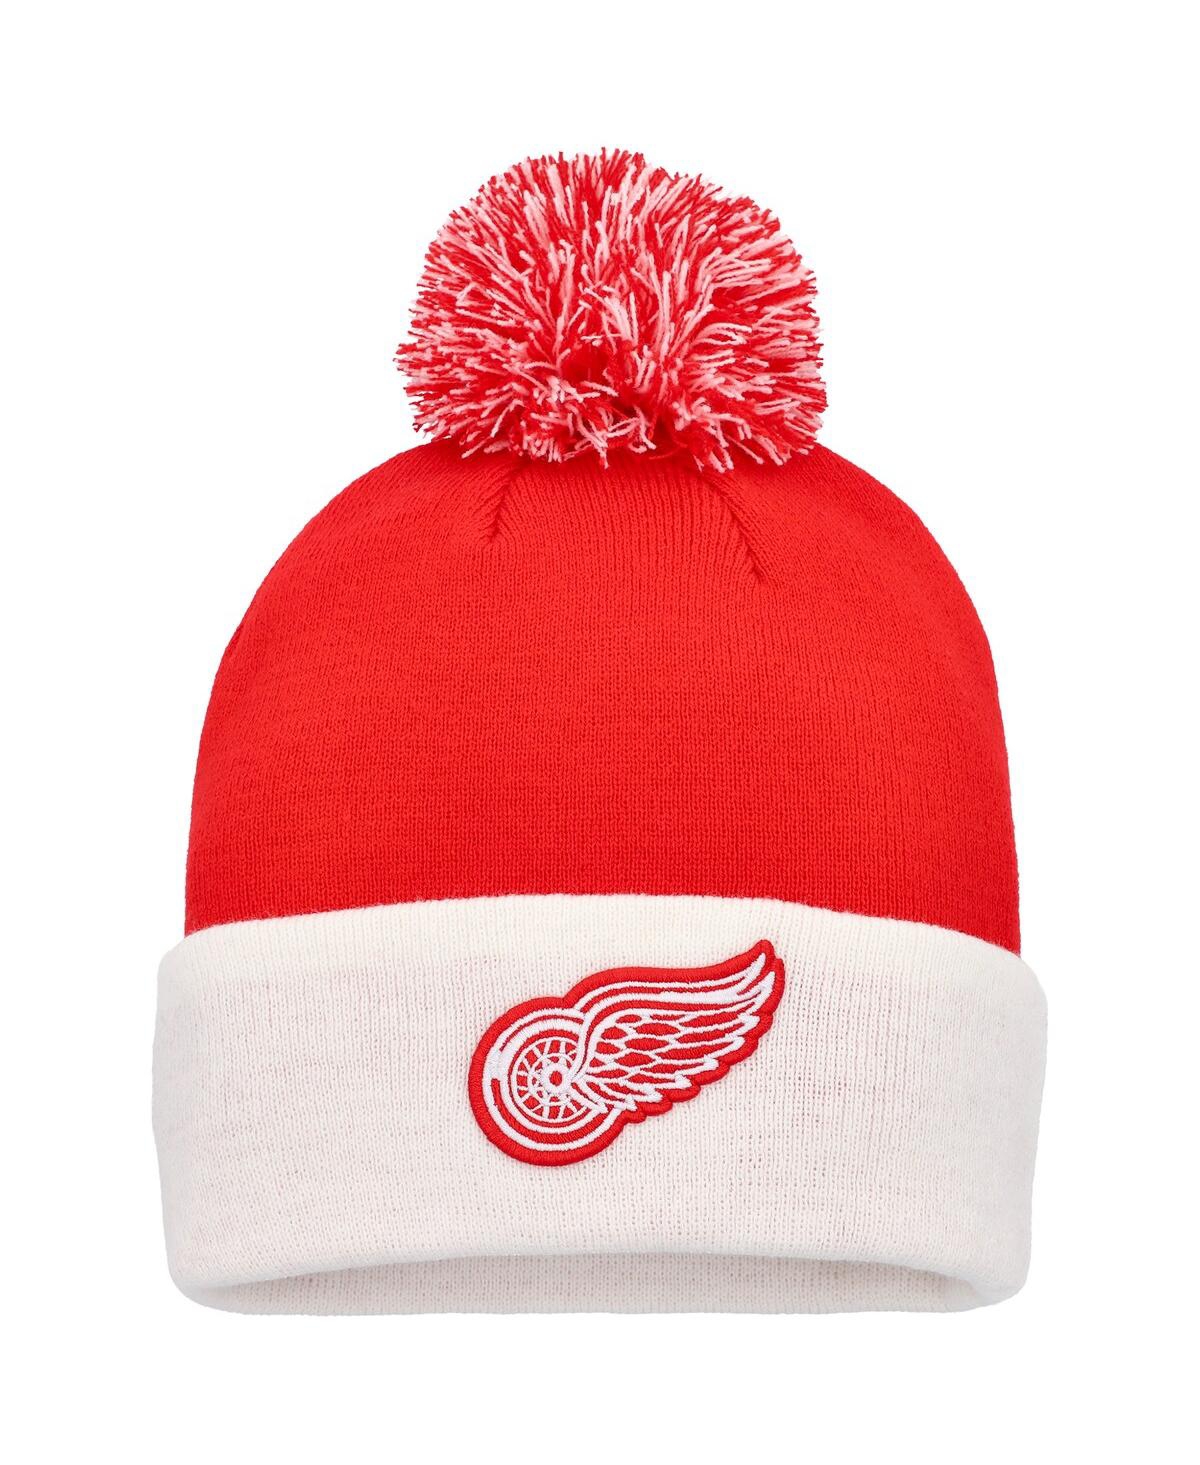 Shop Adidas Originals Men's Adidas Red Detroit Red Wings Team Stripe Cuffed Knit Hat With Pom